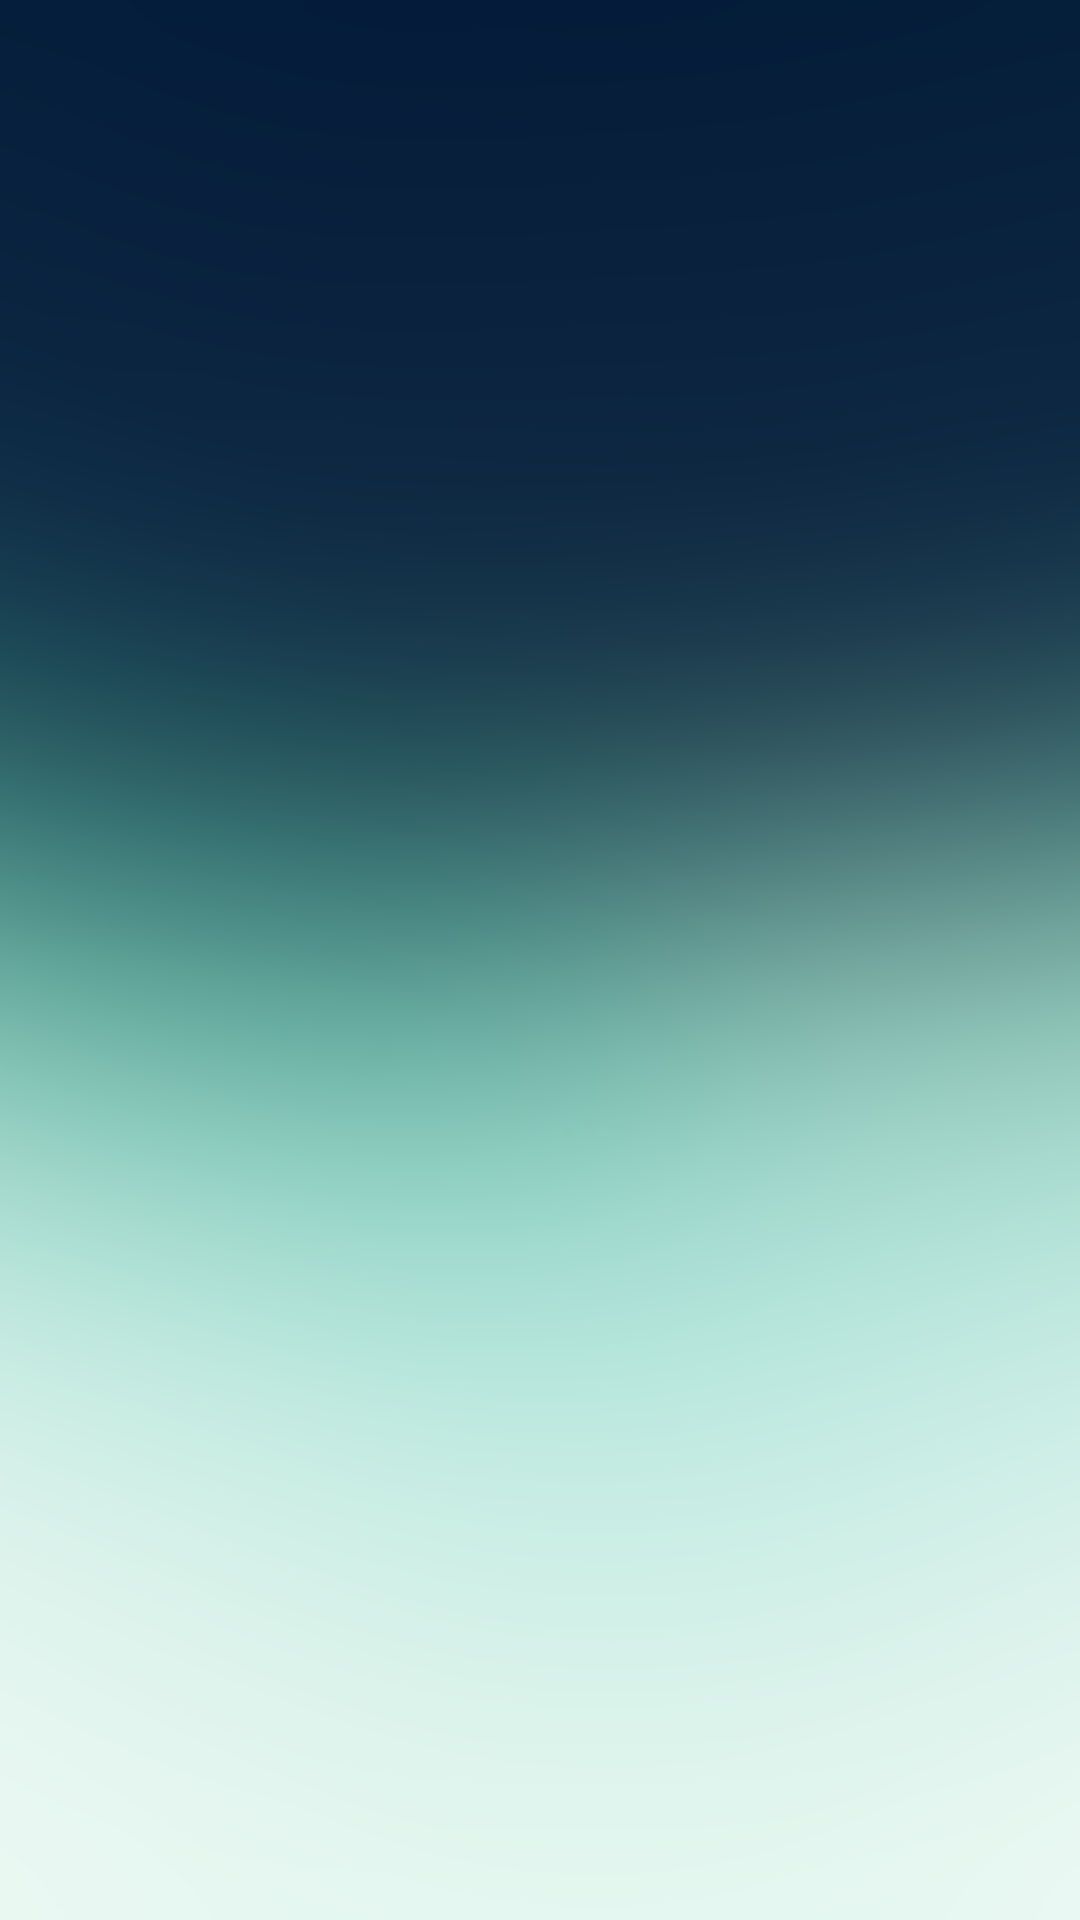 Green Blue Gradient Android Wallpaper free download